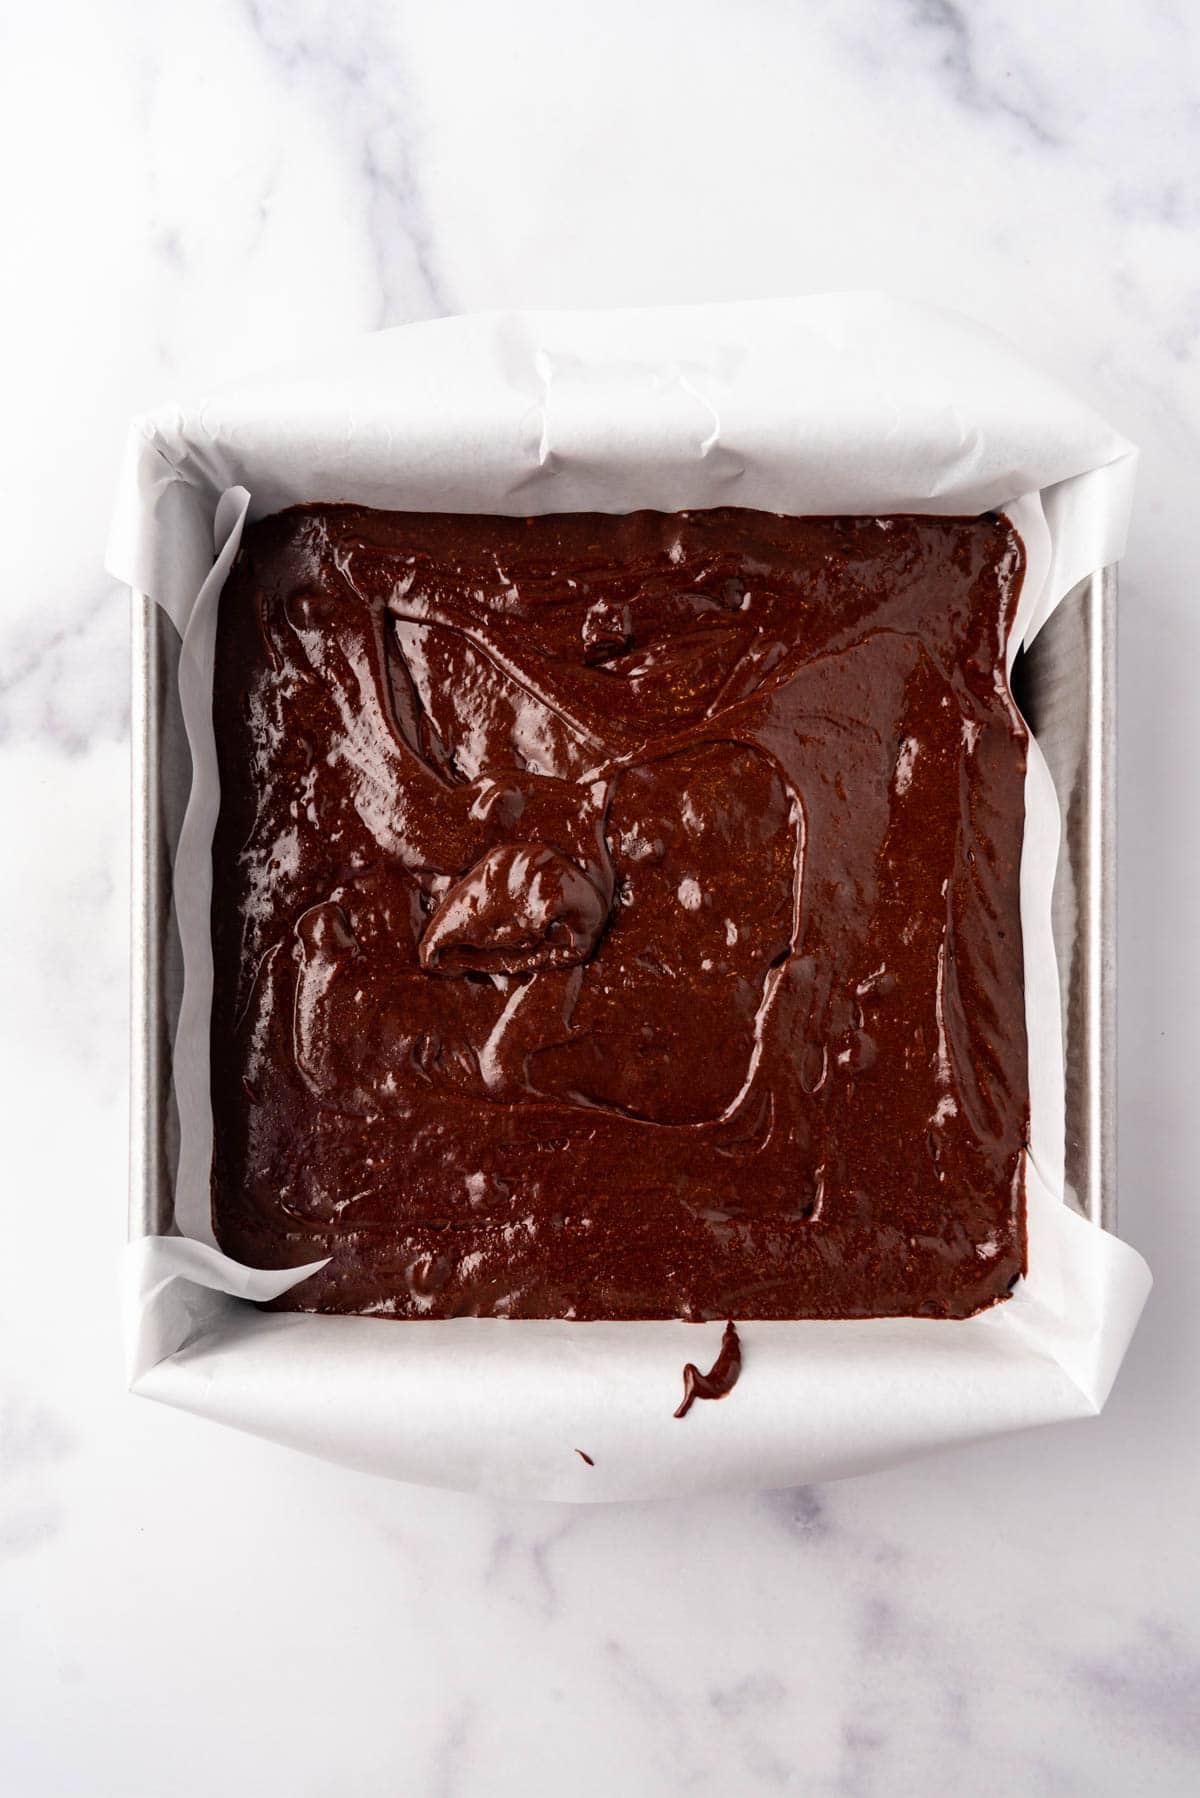 Brownie batter in a square baking pan.